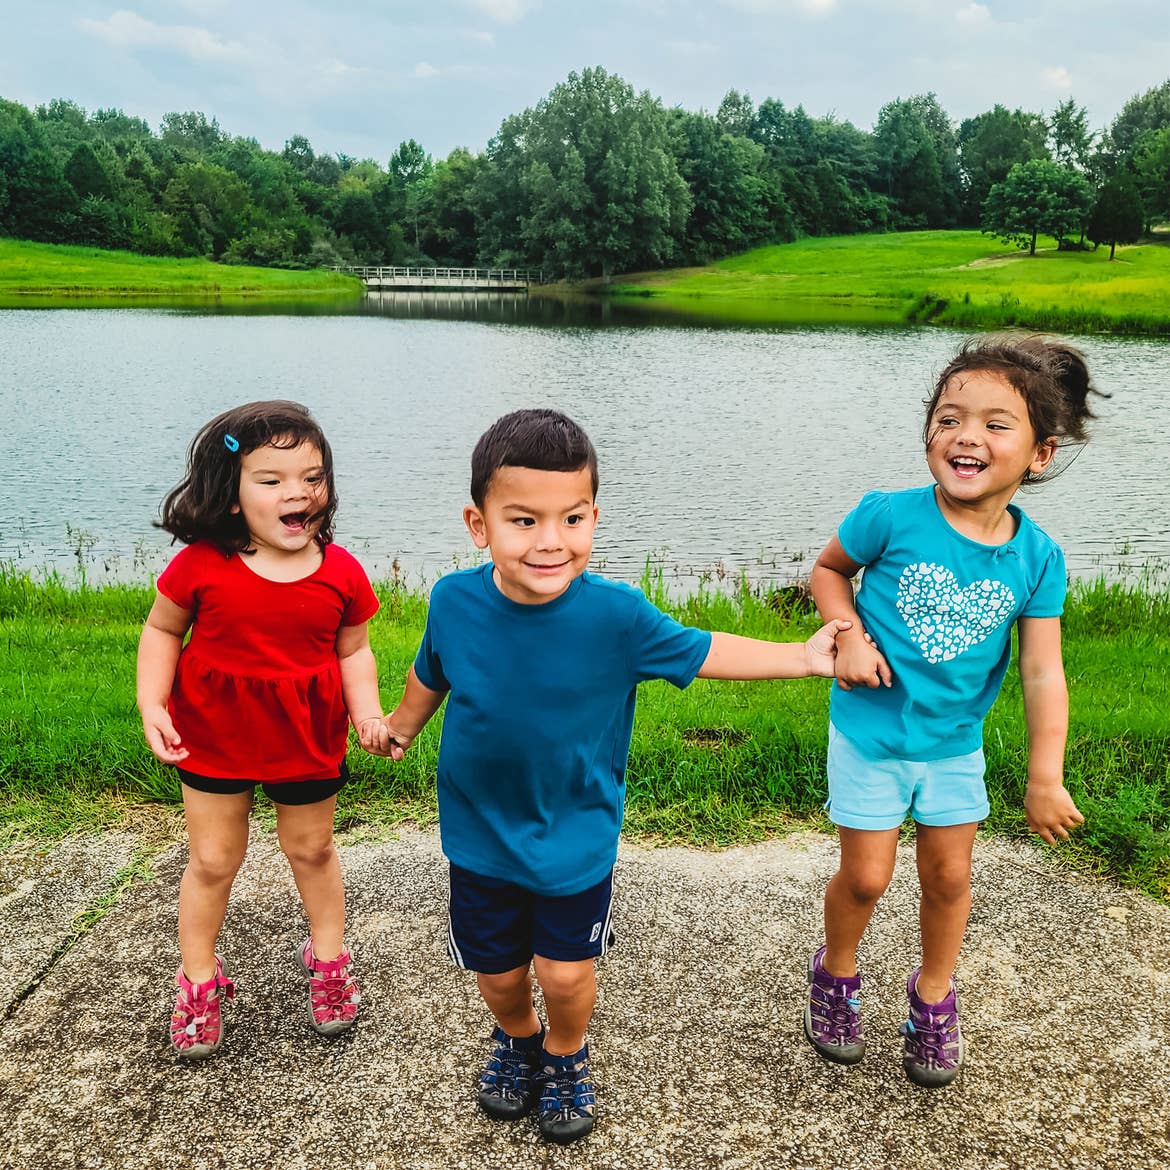 Angelica's three children smile happily in front of a pond in their RV park.